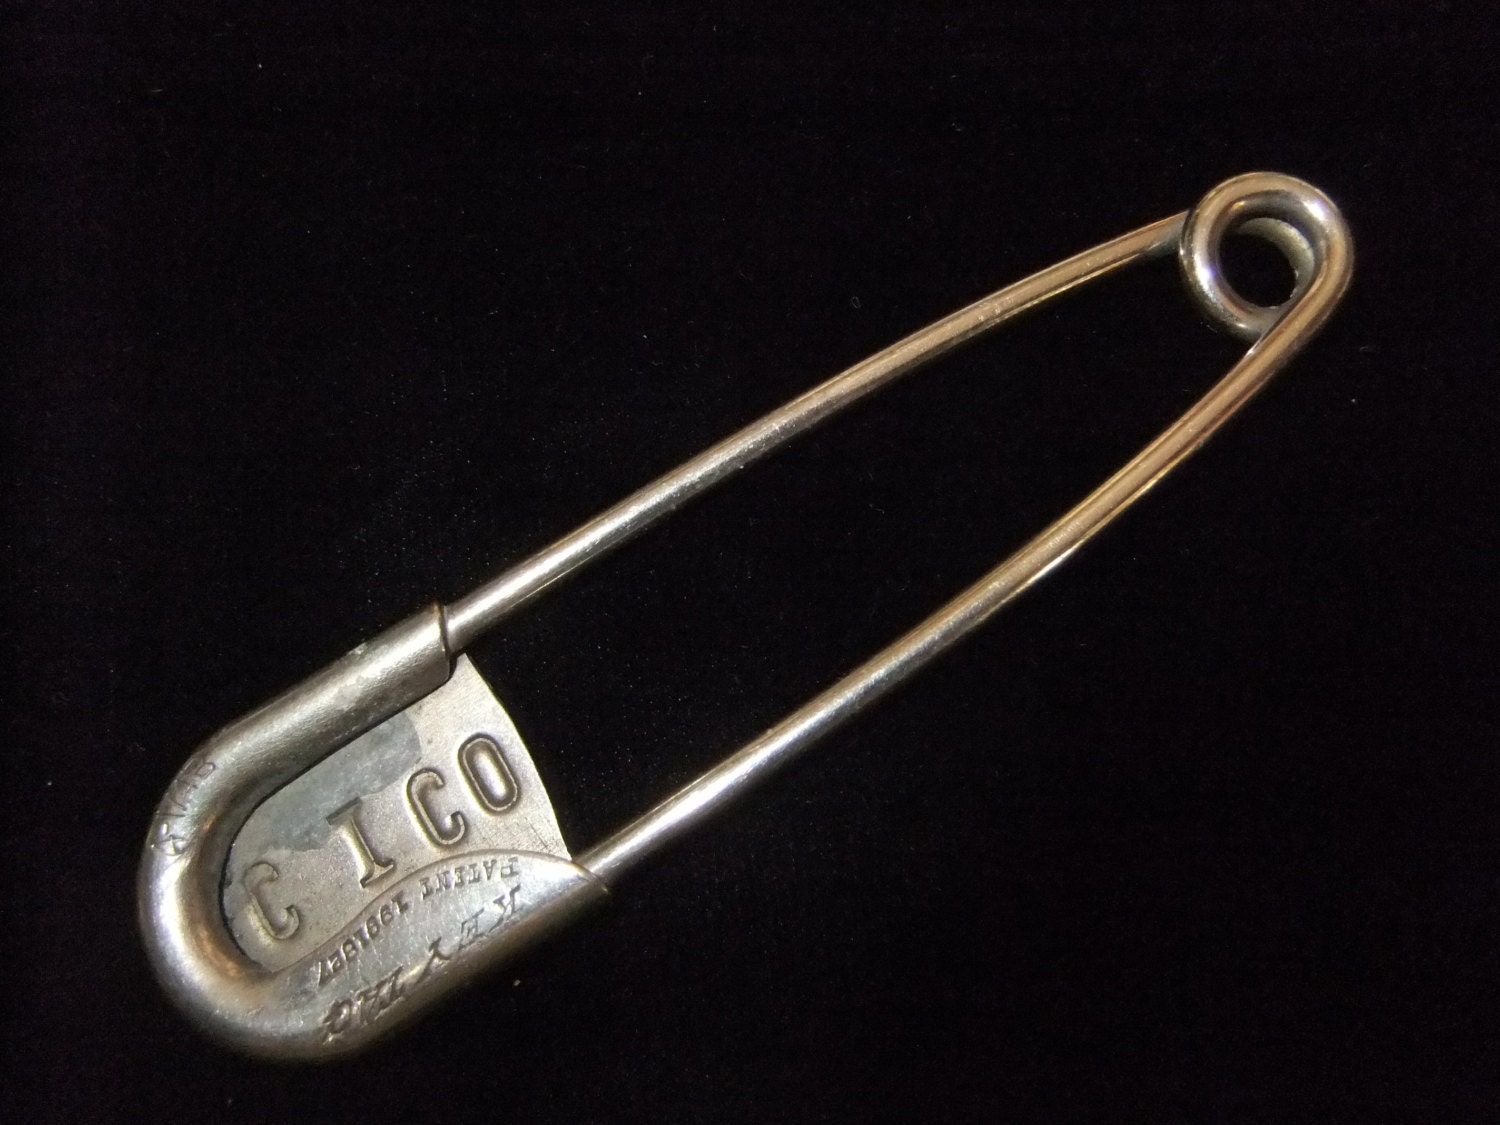 Vintage Key Tag Laundry Safety Pin Key Chain Patent Number 1991827